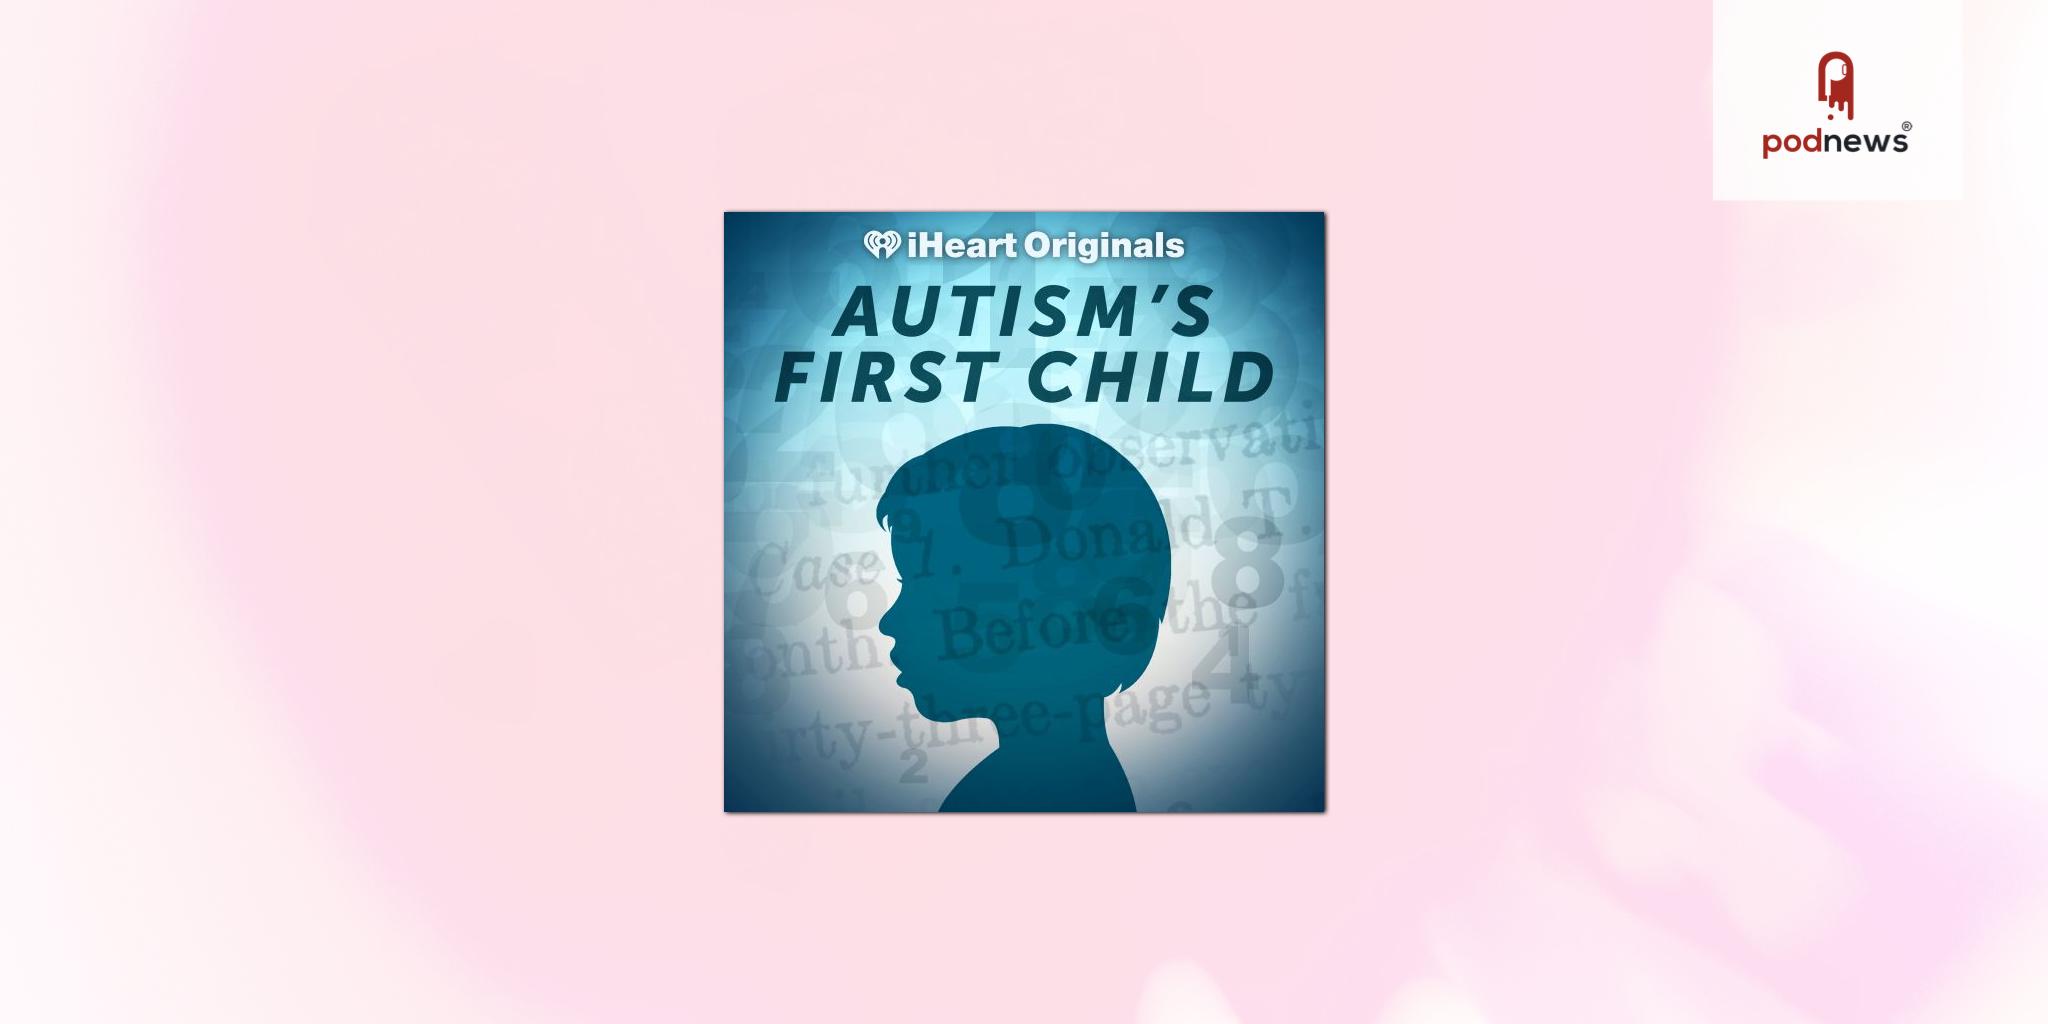 iHeartRadio Launches New Original Podcast, “Autism’s First Child,” Which Traces The History Of Autism